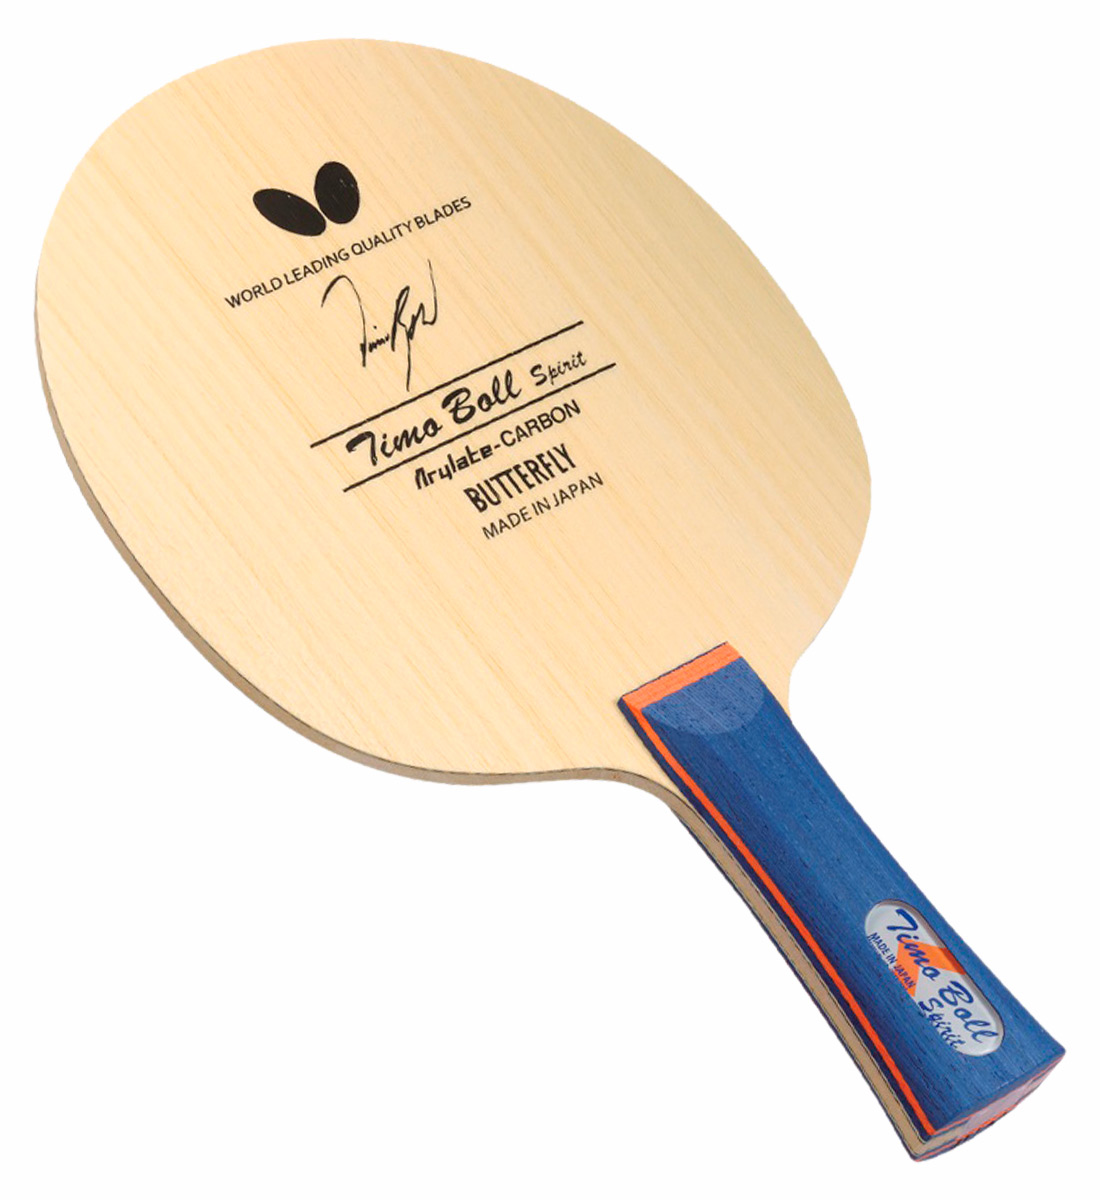 When you will have in stock flared handle Timo Boll spirit